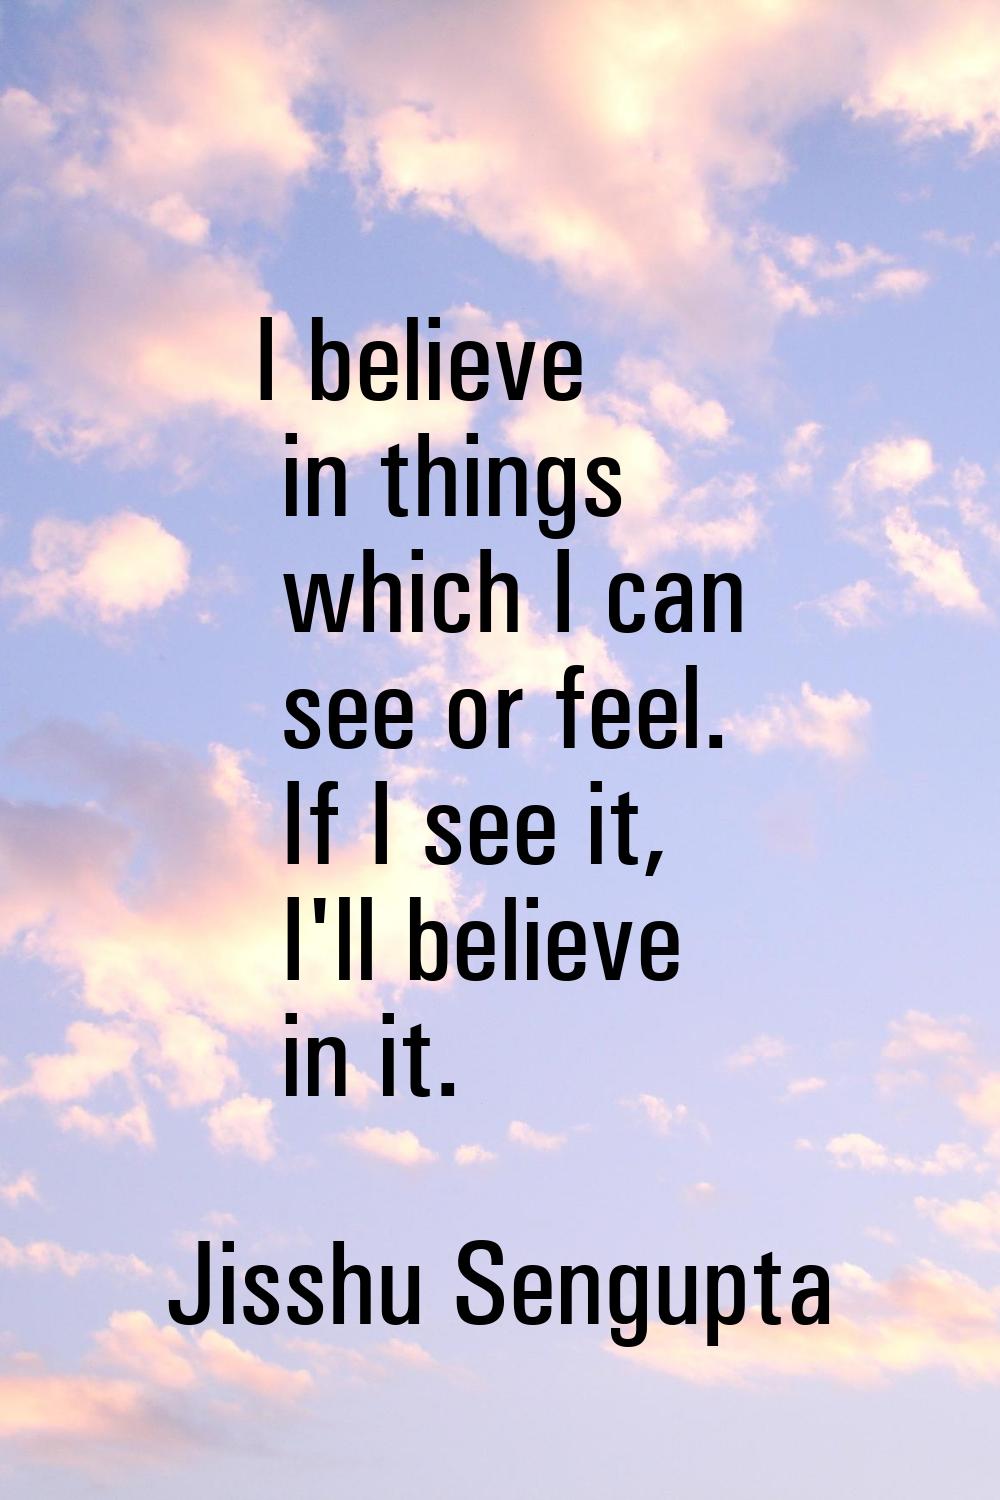 I believe in things which I can see or feel. If I see it, I'll believe in it.